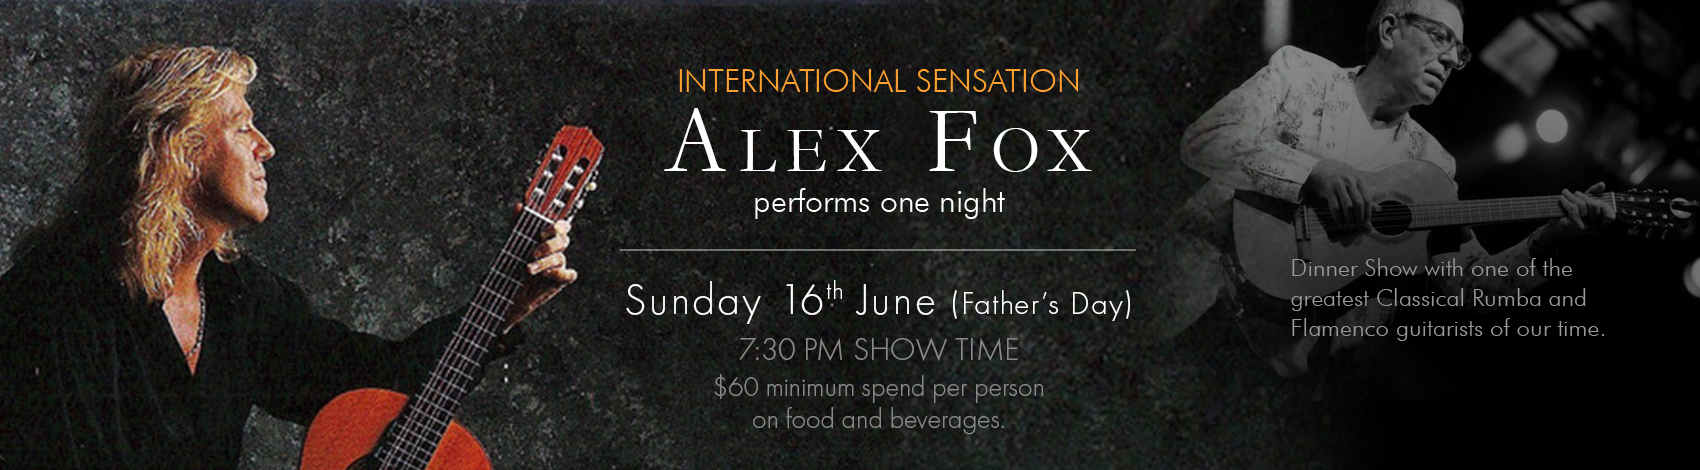 International Sensation Alex Fox performs one night June 16th 7:30 PM Show Time $60 minimum spend per person  on food and beverages.